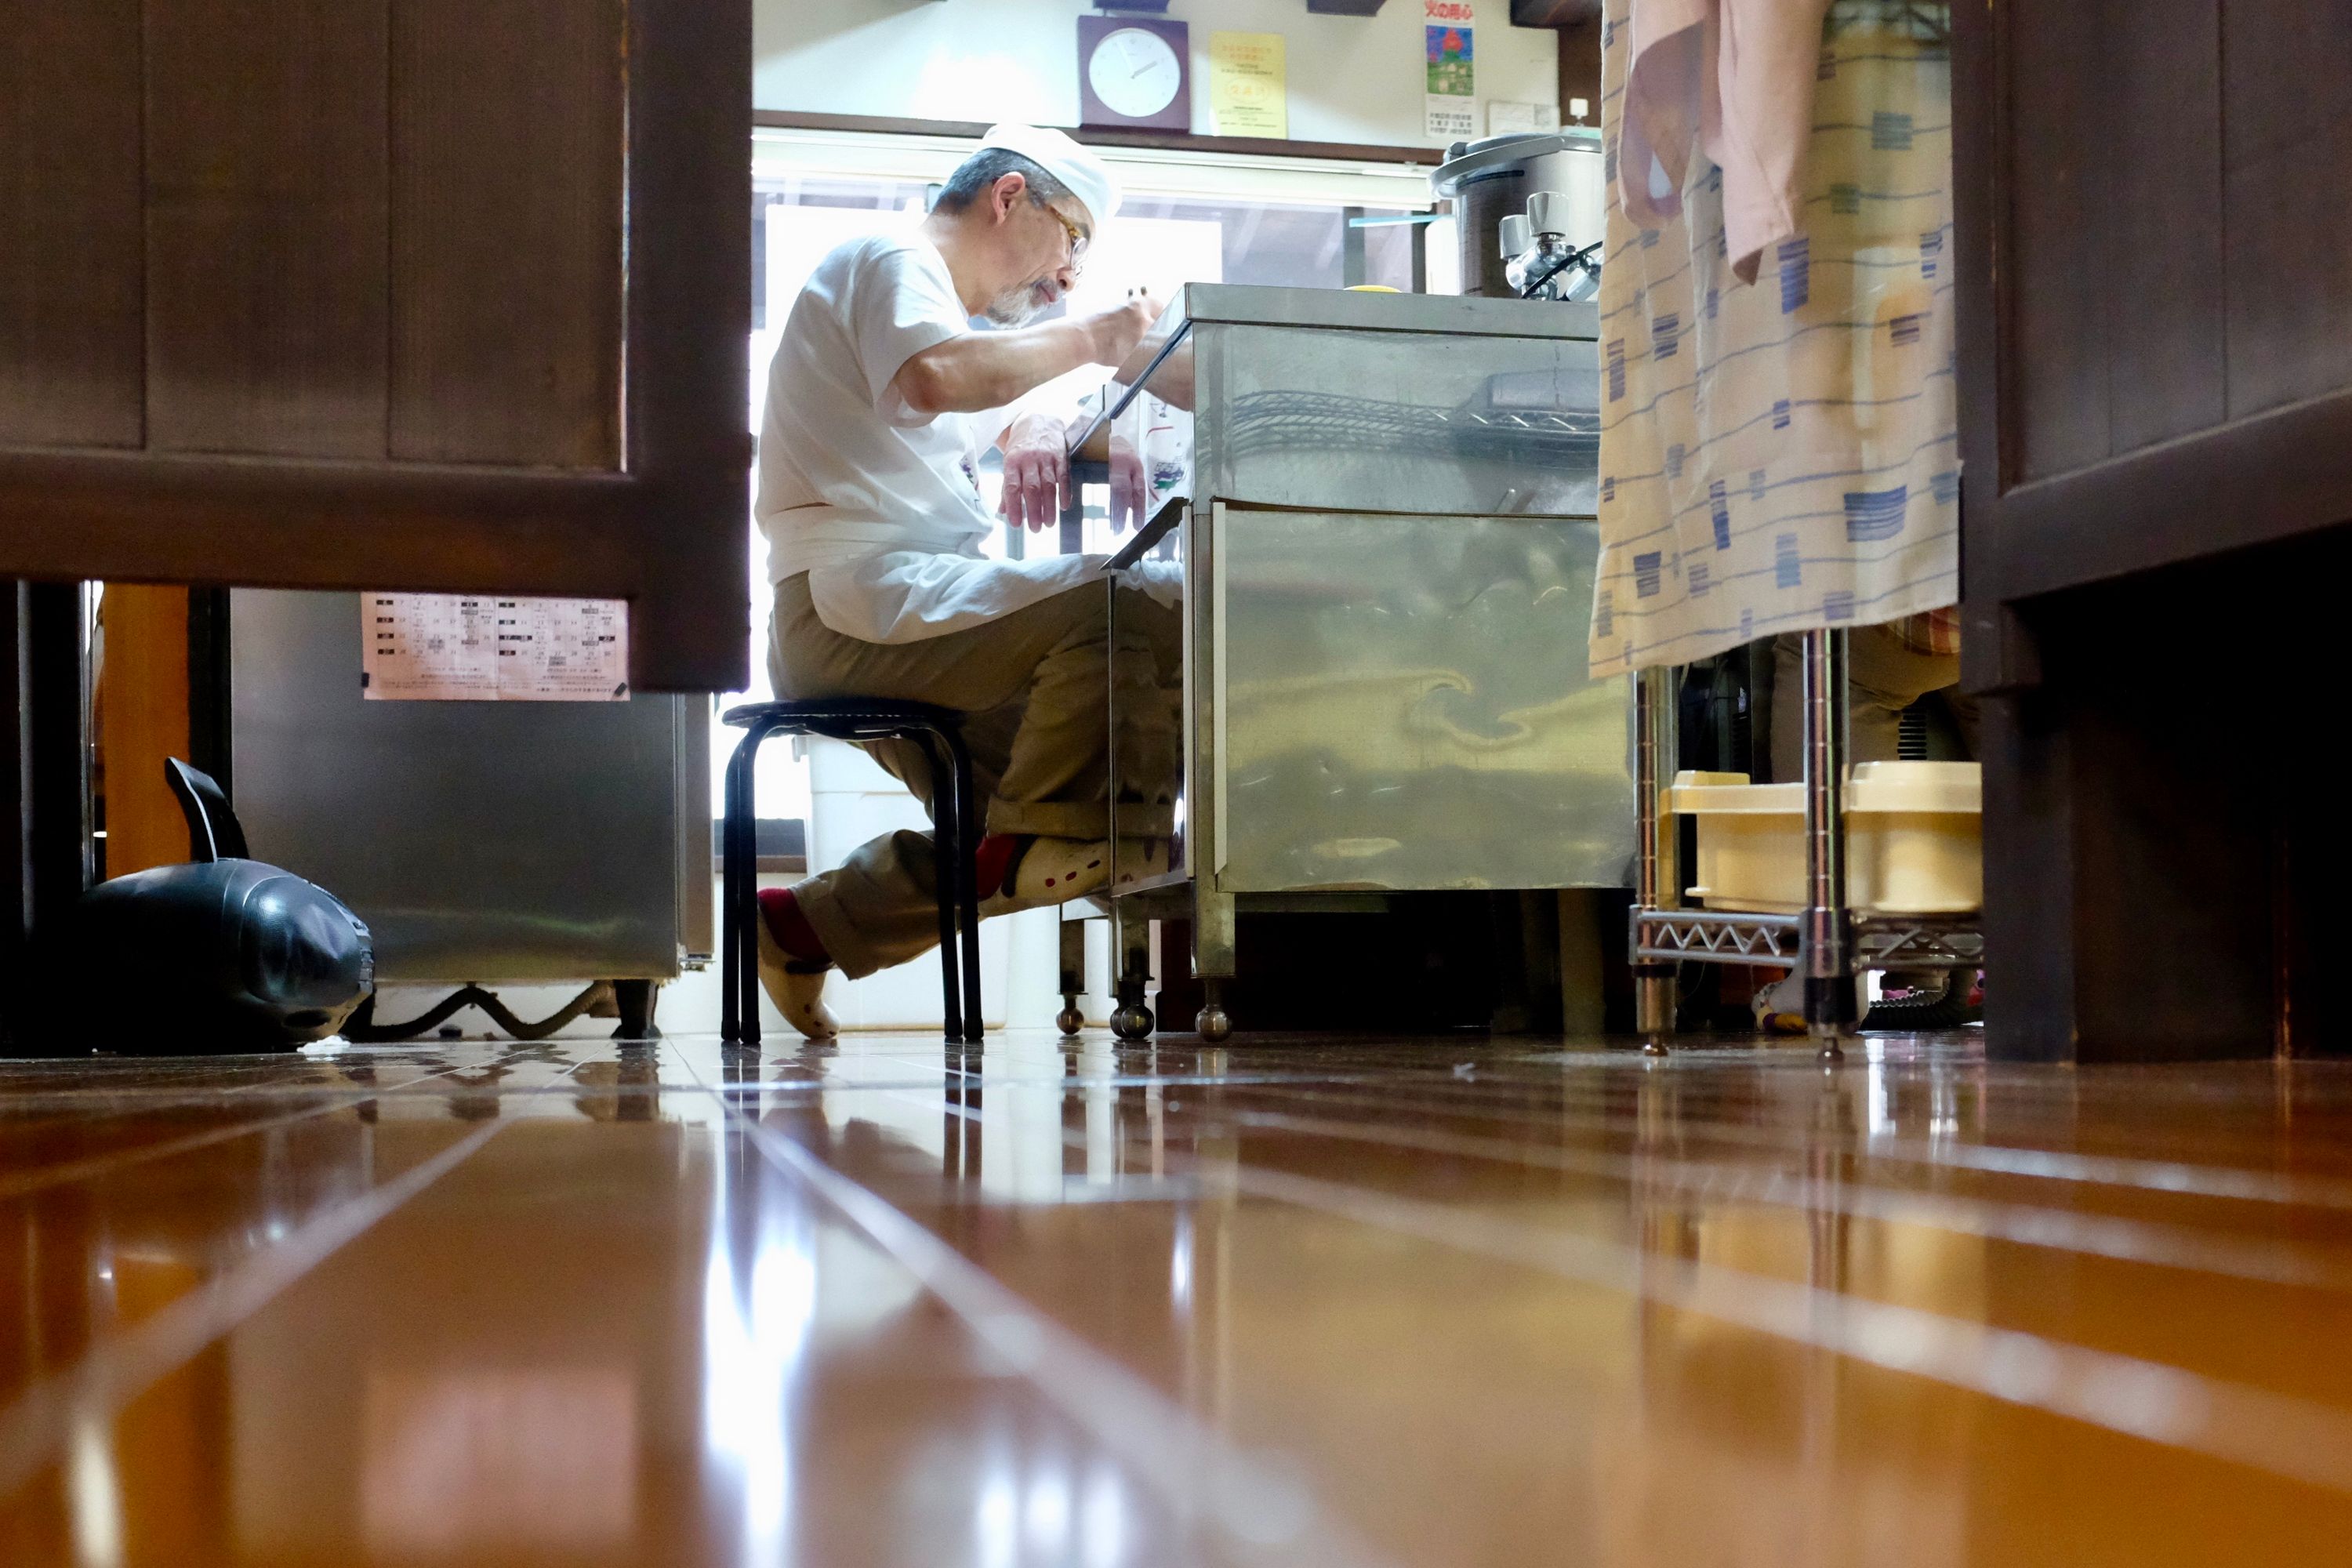 Photographed from a distance, a Japanese chef eats noodles at the kitchen counter of a restaurant.